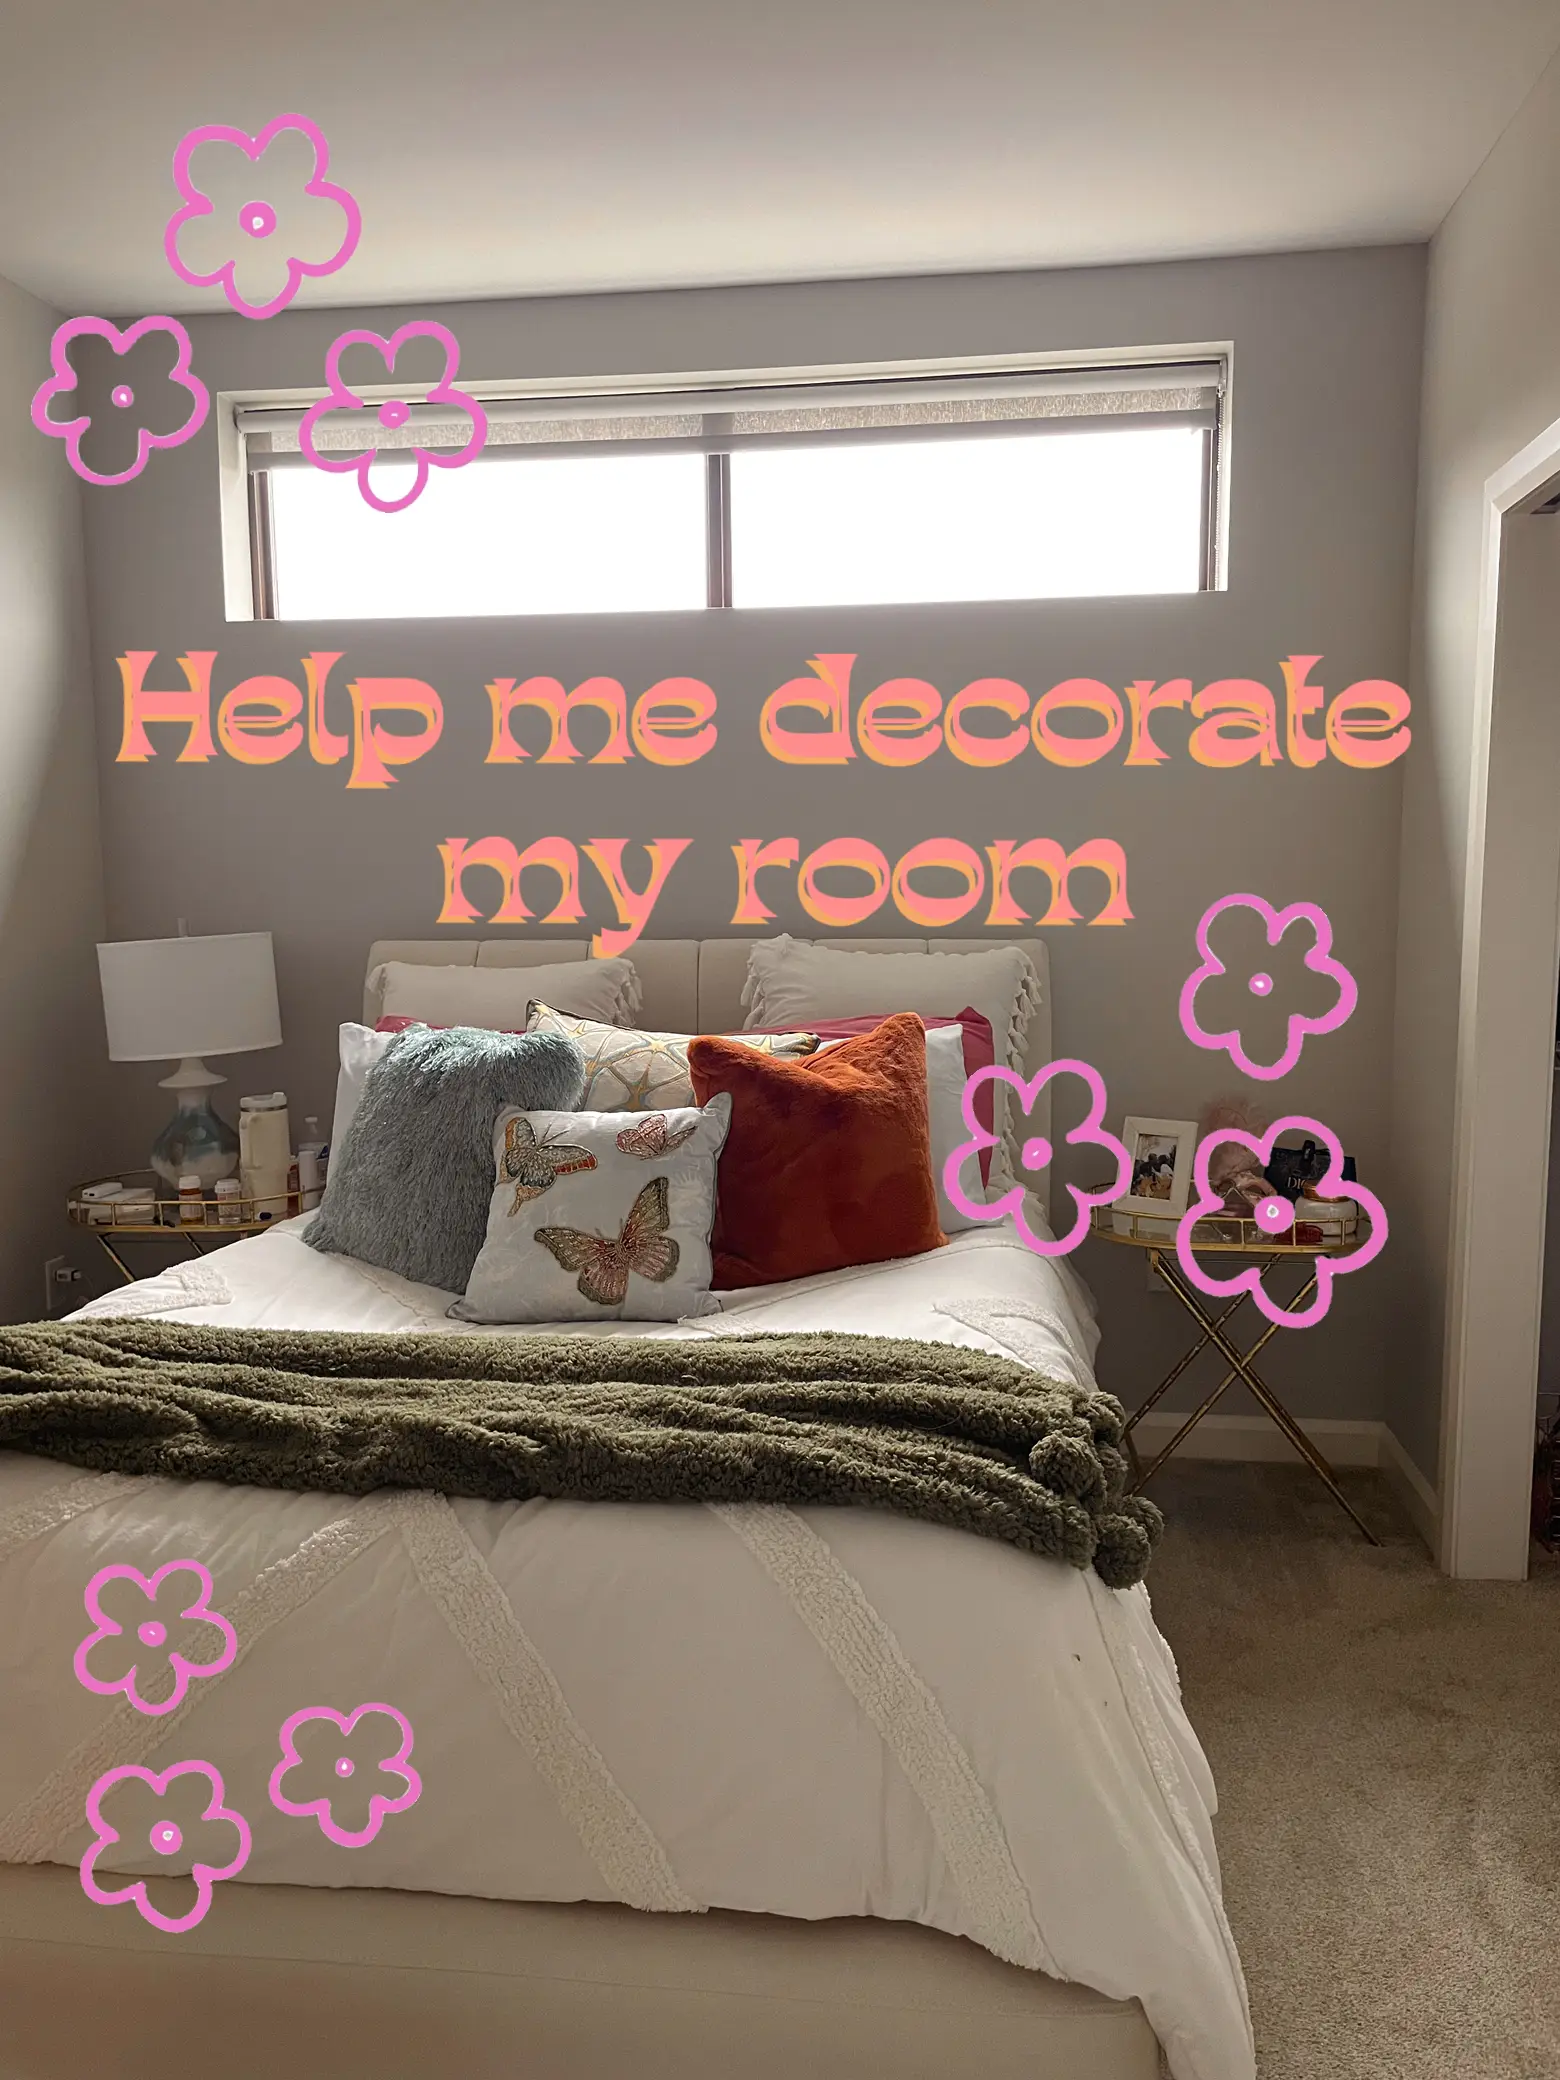 HELP ME DECORATE MY ROOM | Gallery posted by Chloe Coldrick | Lemon8